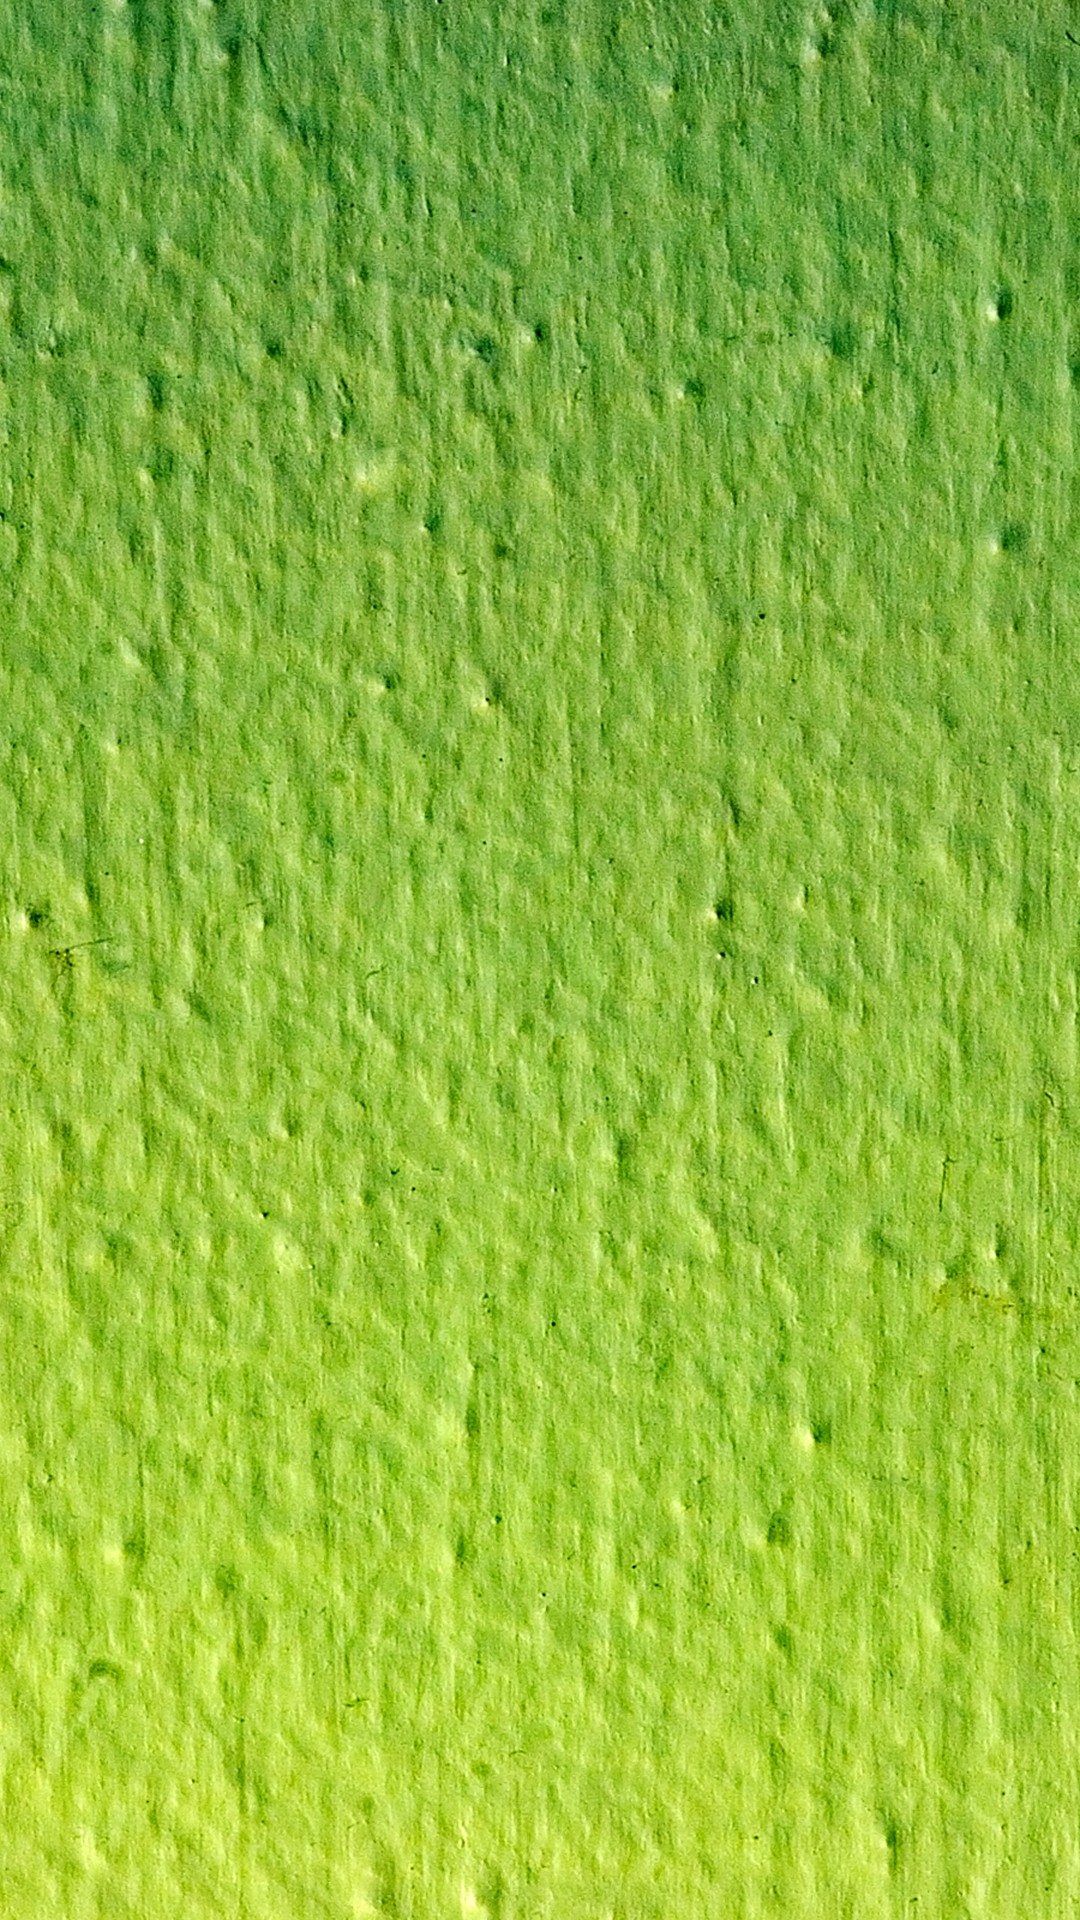 iPhone X Wallpaper Lime Green with image resolution 1080x1920 pixel. You can make this wallpaper for your iPhone 5, 6, 7, 8, X backgrounds, Mobile Screensaver, or iPad Lock Screen